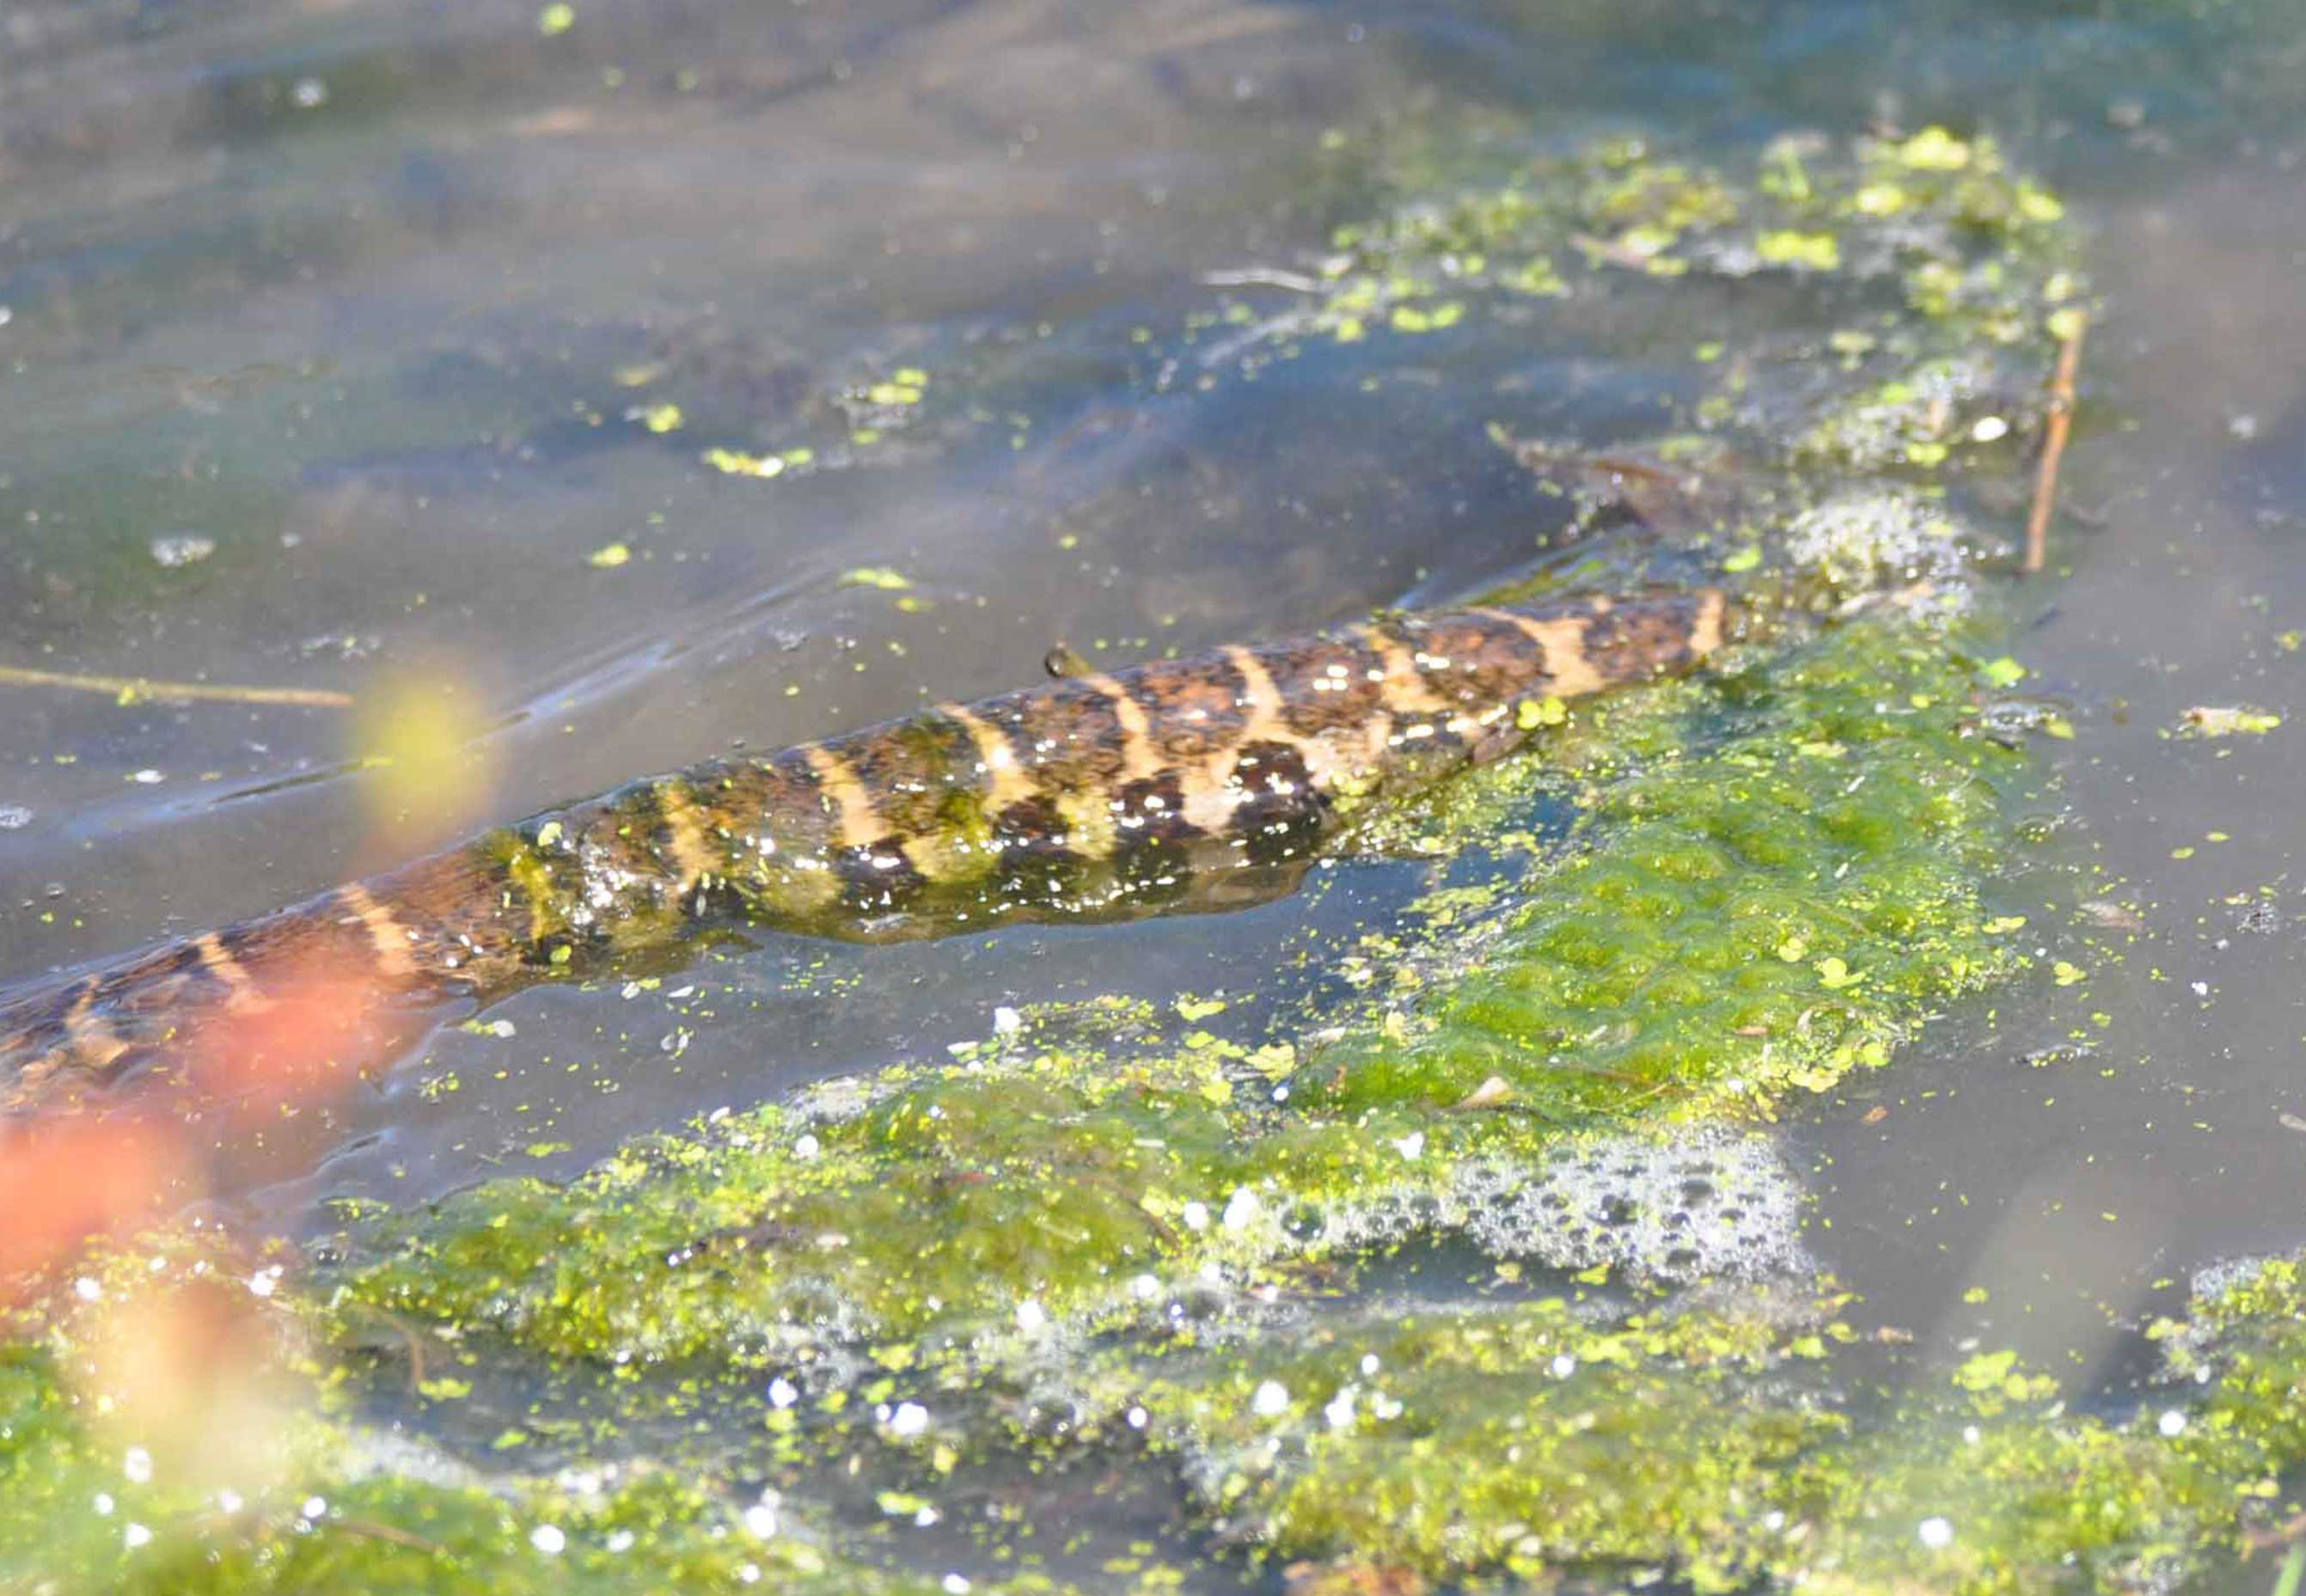 A northern water snake in the water.